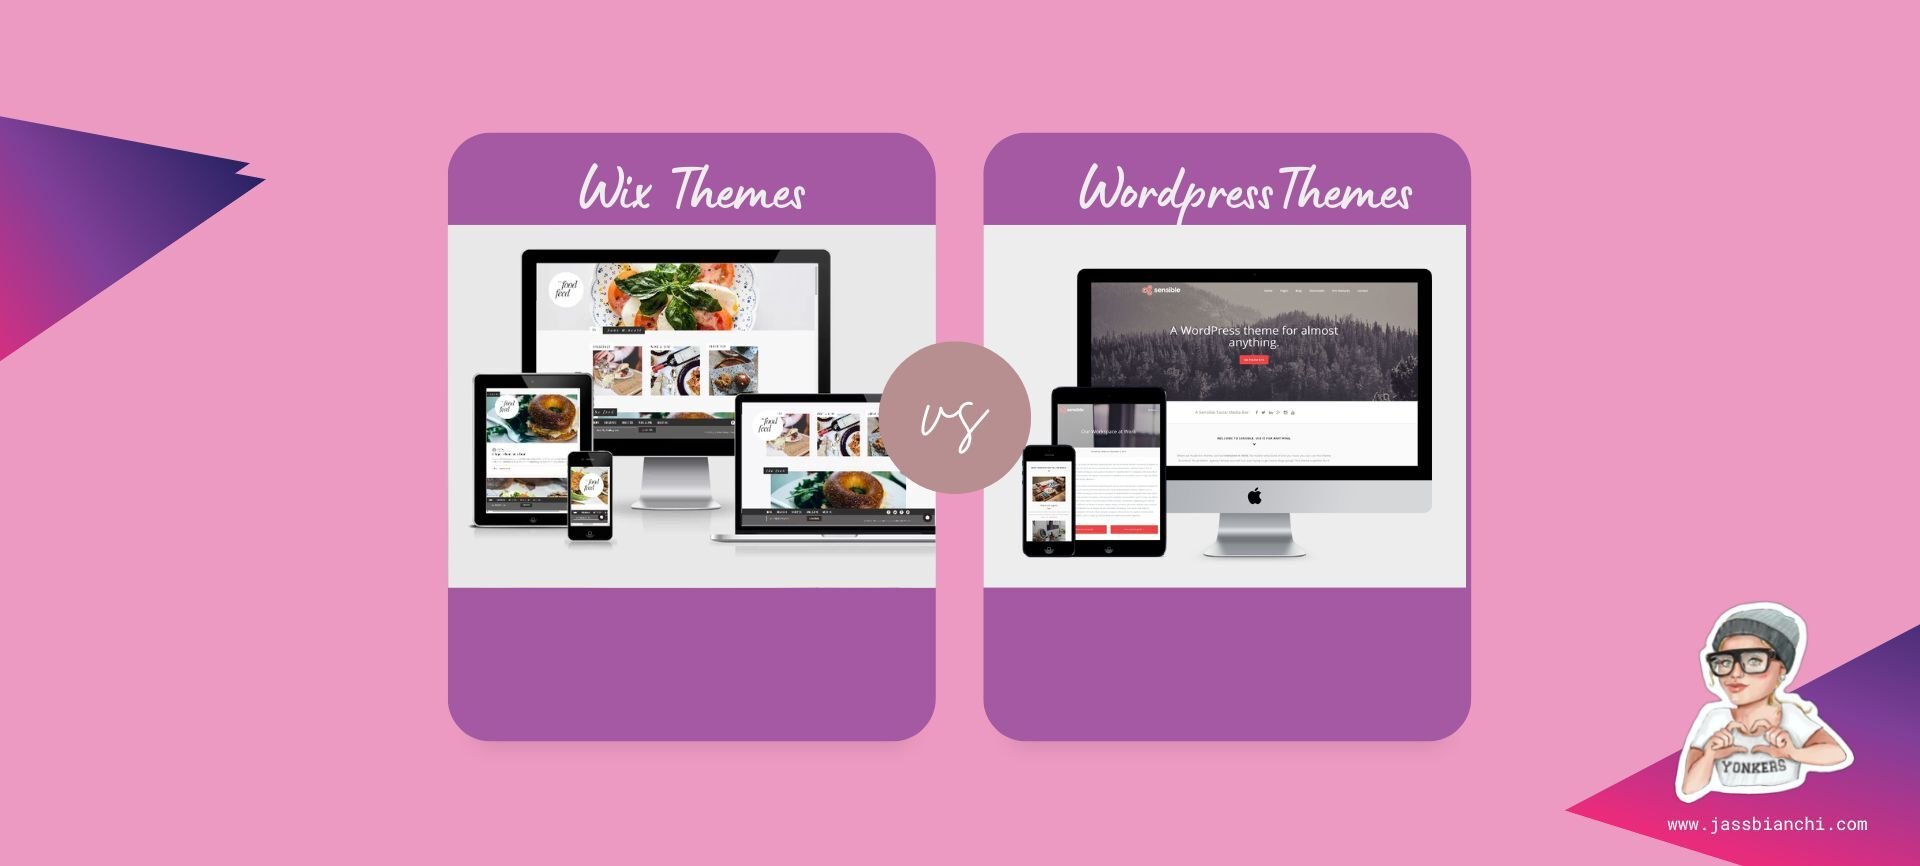 WordPress Themes vs. Wix Themes - Which is Better for Your Site?